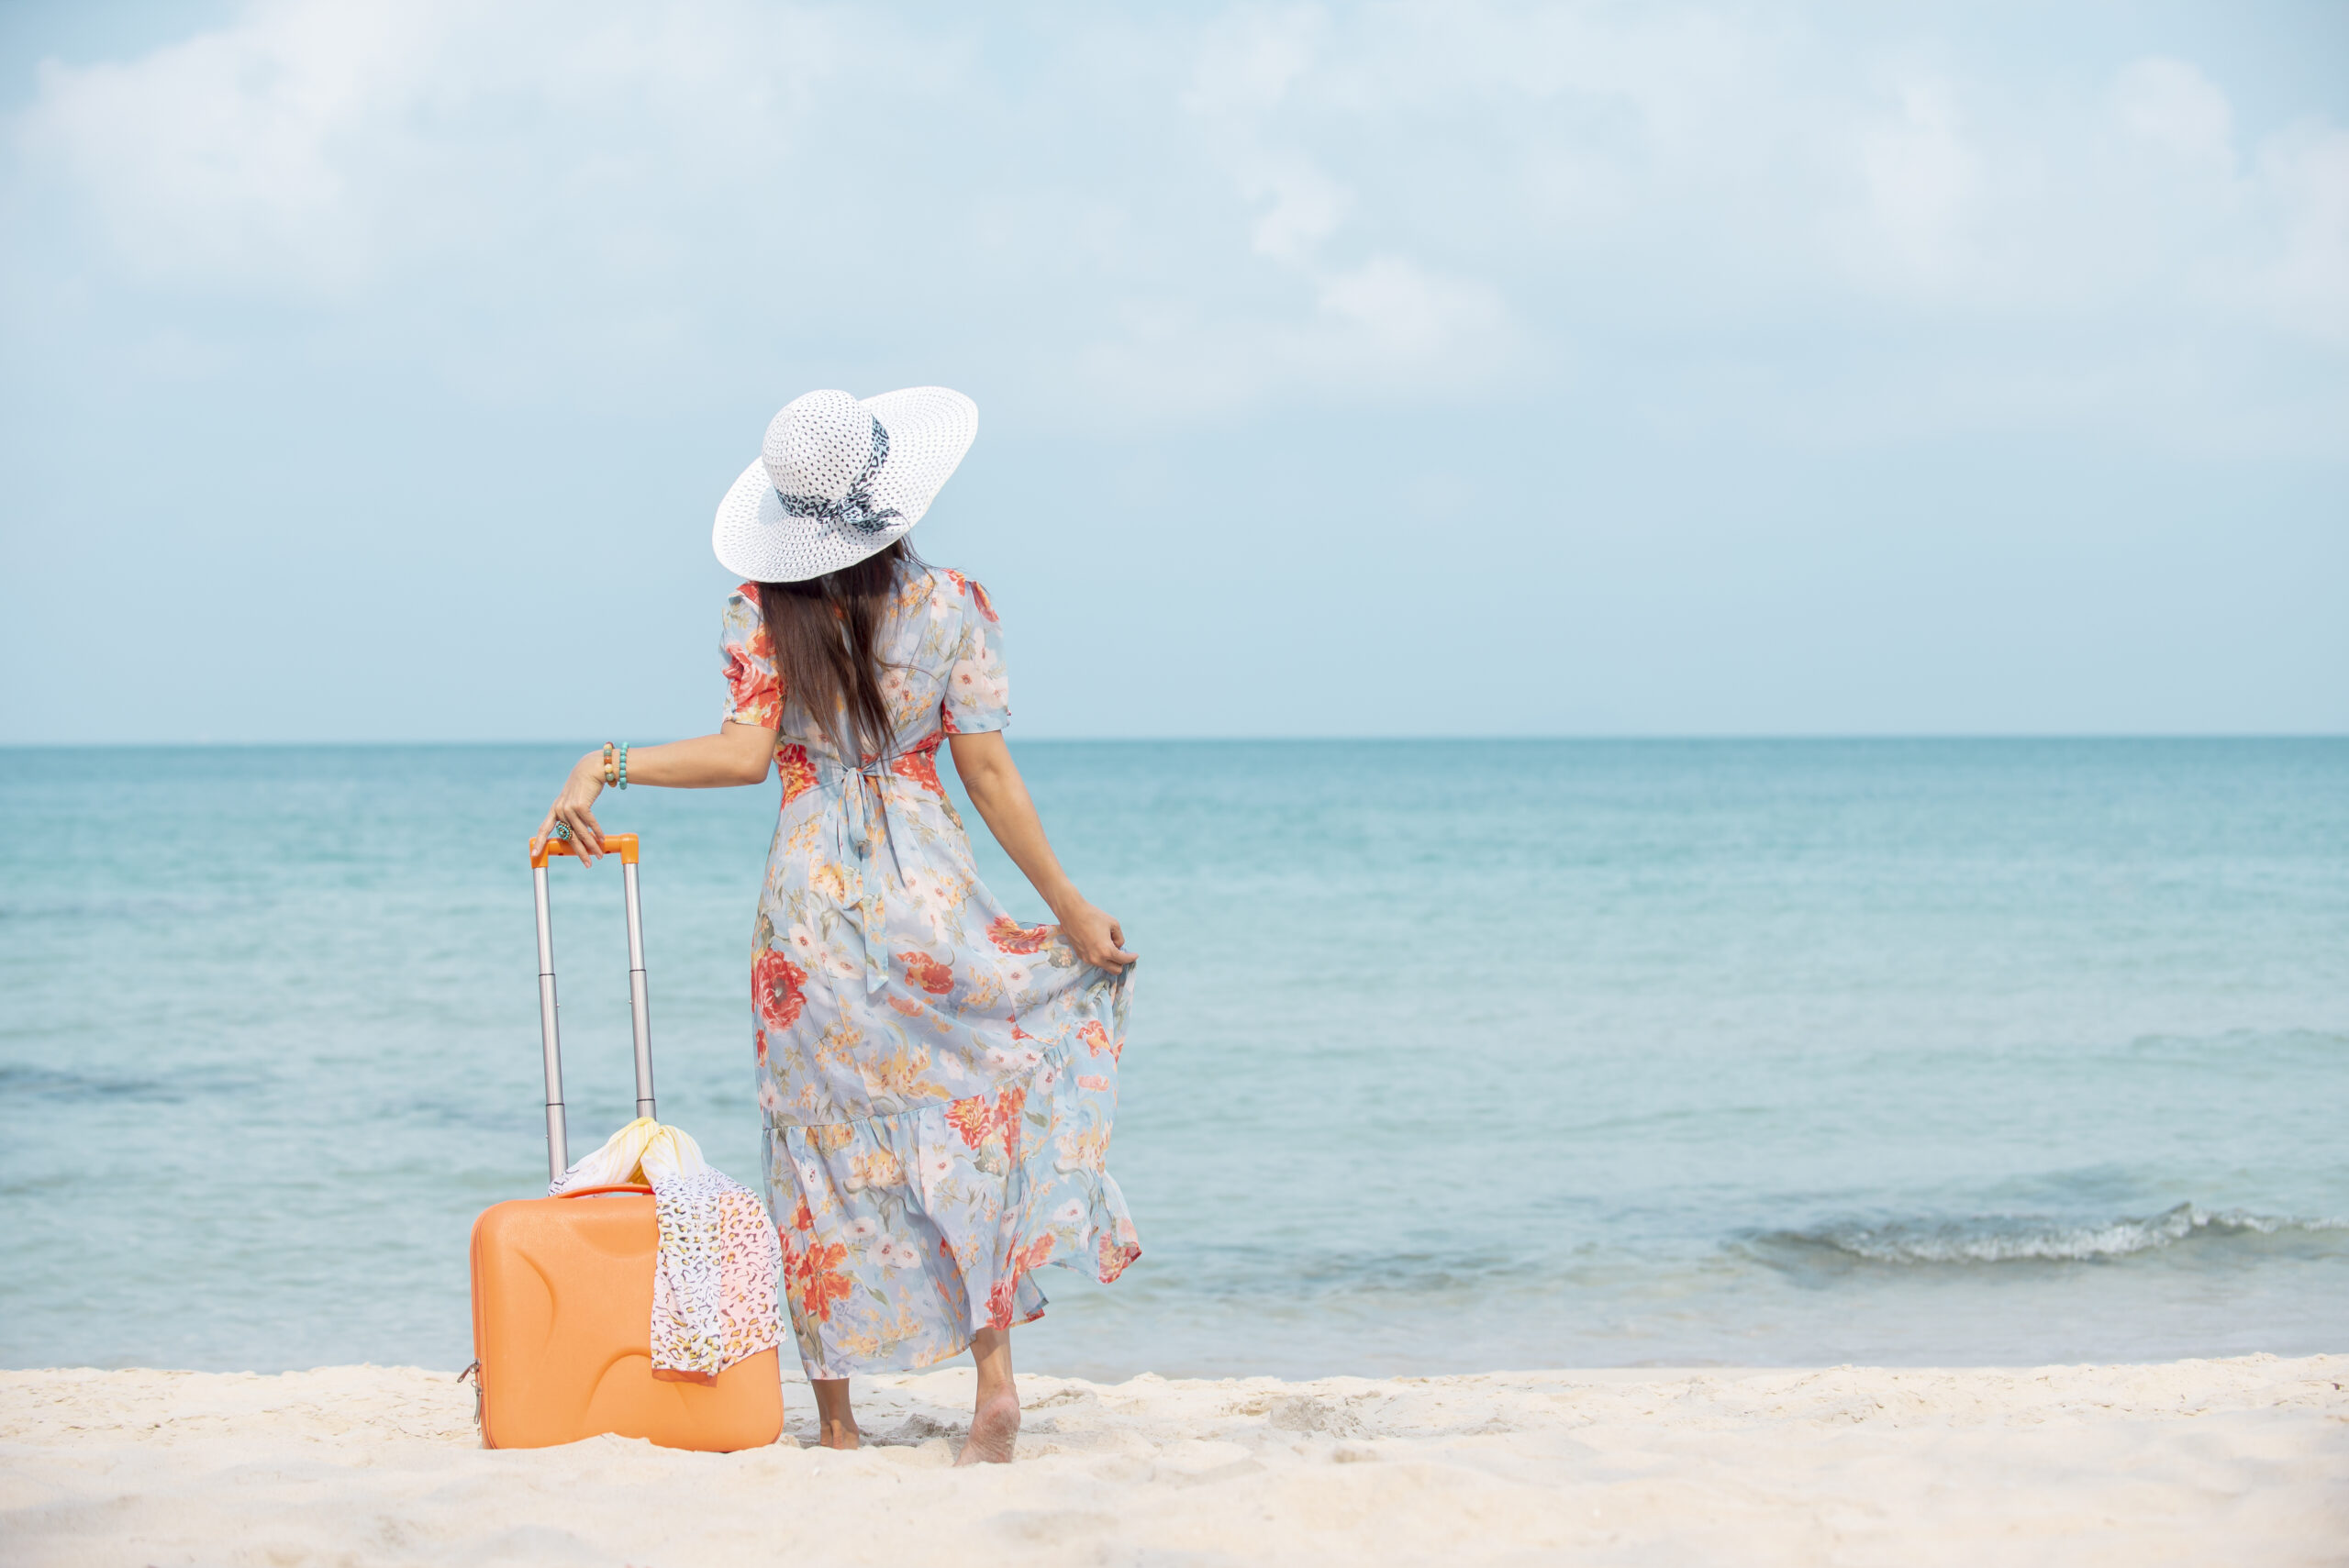 10 REASONS WHY YOU SHOULD TRAVEL SOLO